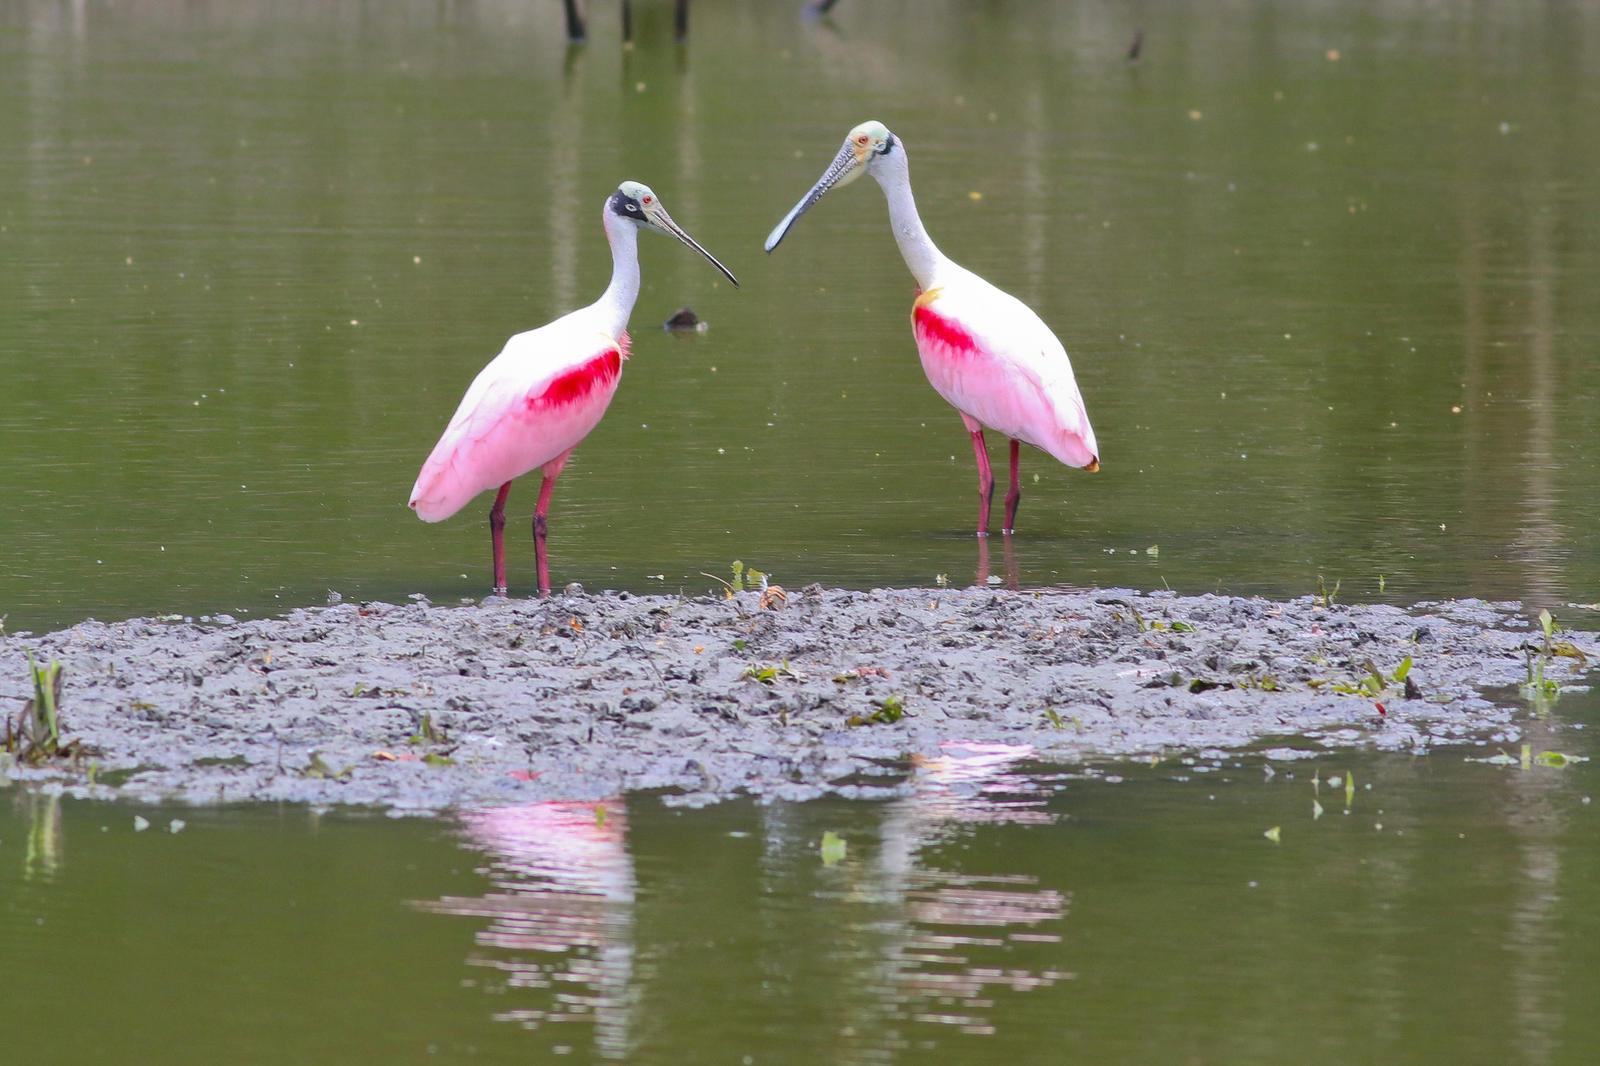 Roseate Spoonbill Photo by Tom Ford-Hutchinson